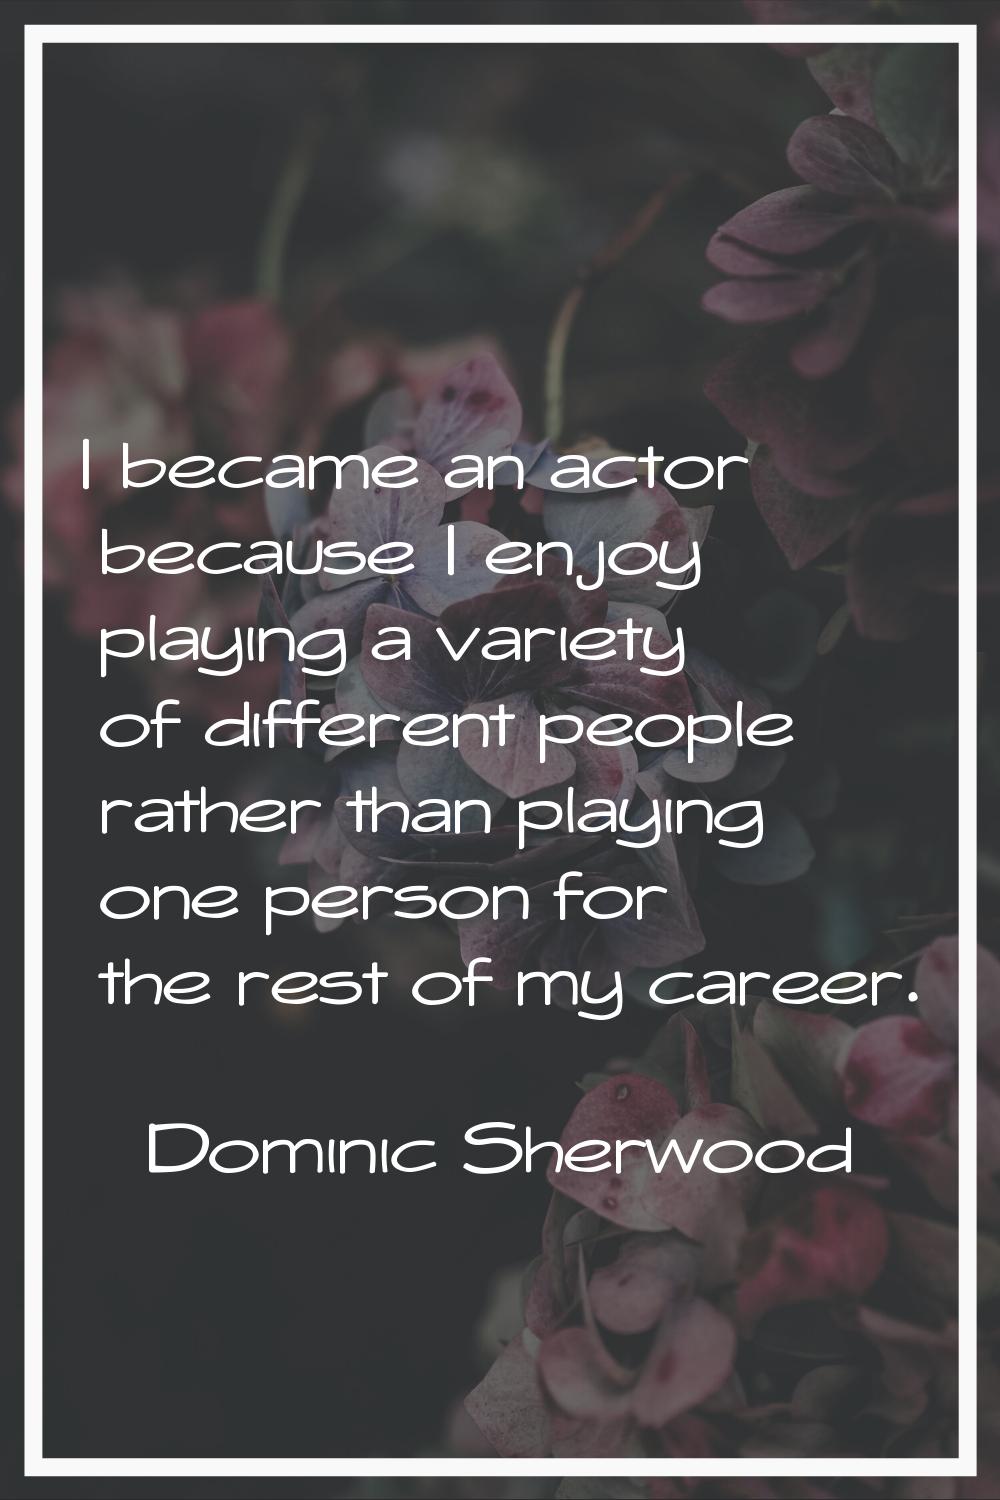 I became an actor because I enjoy playing a variety of different people rather than playing one per